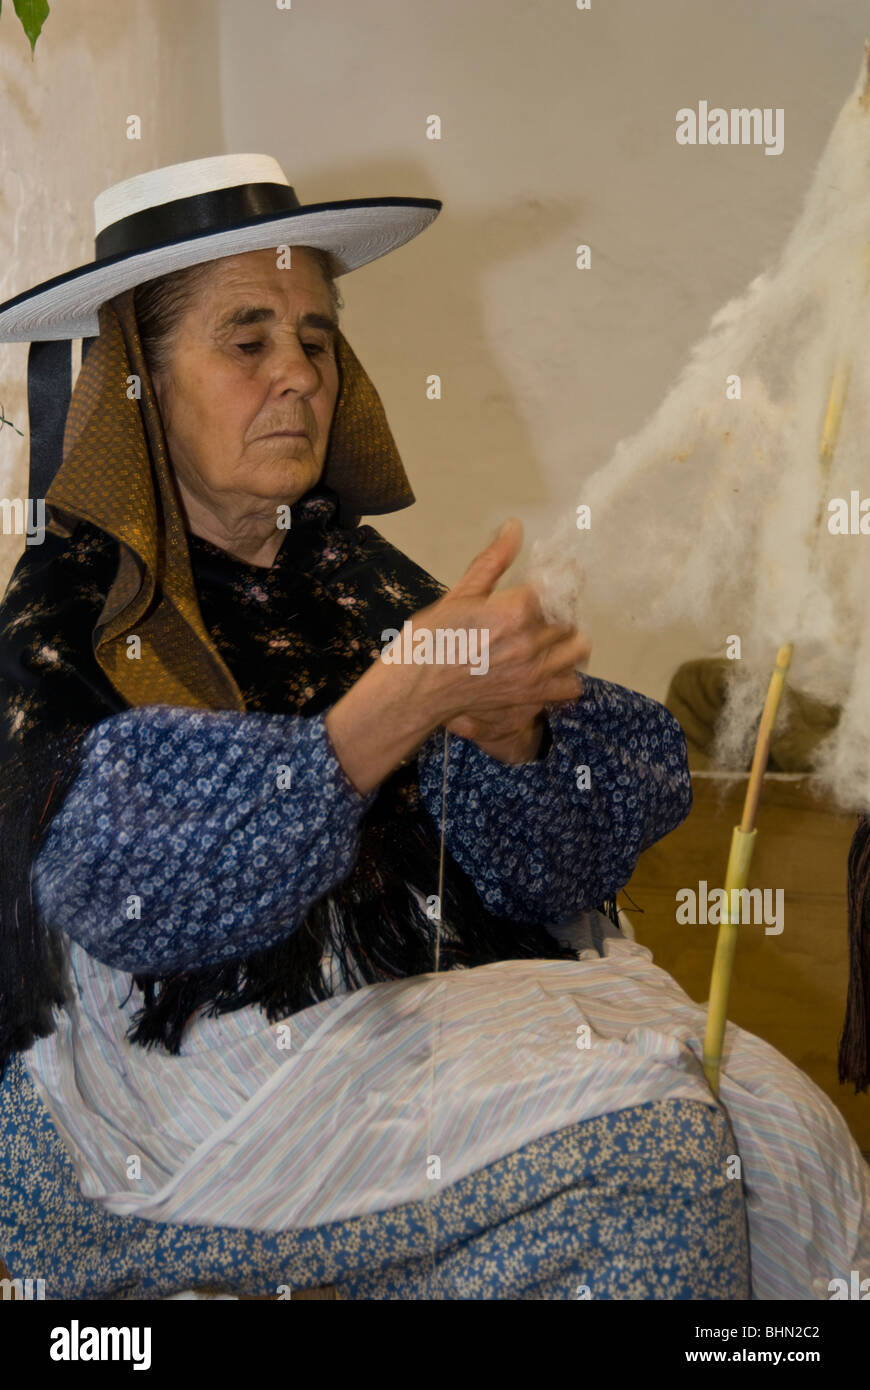 Elderly woman in traditional costume spinning wool, Ibiza, Spain Stock Photo